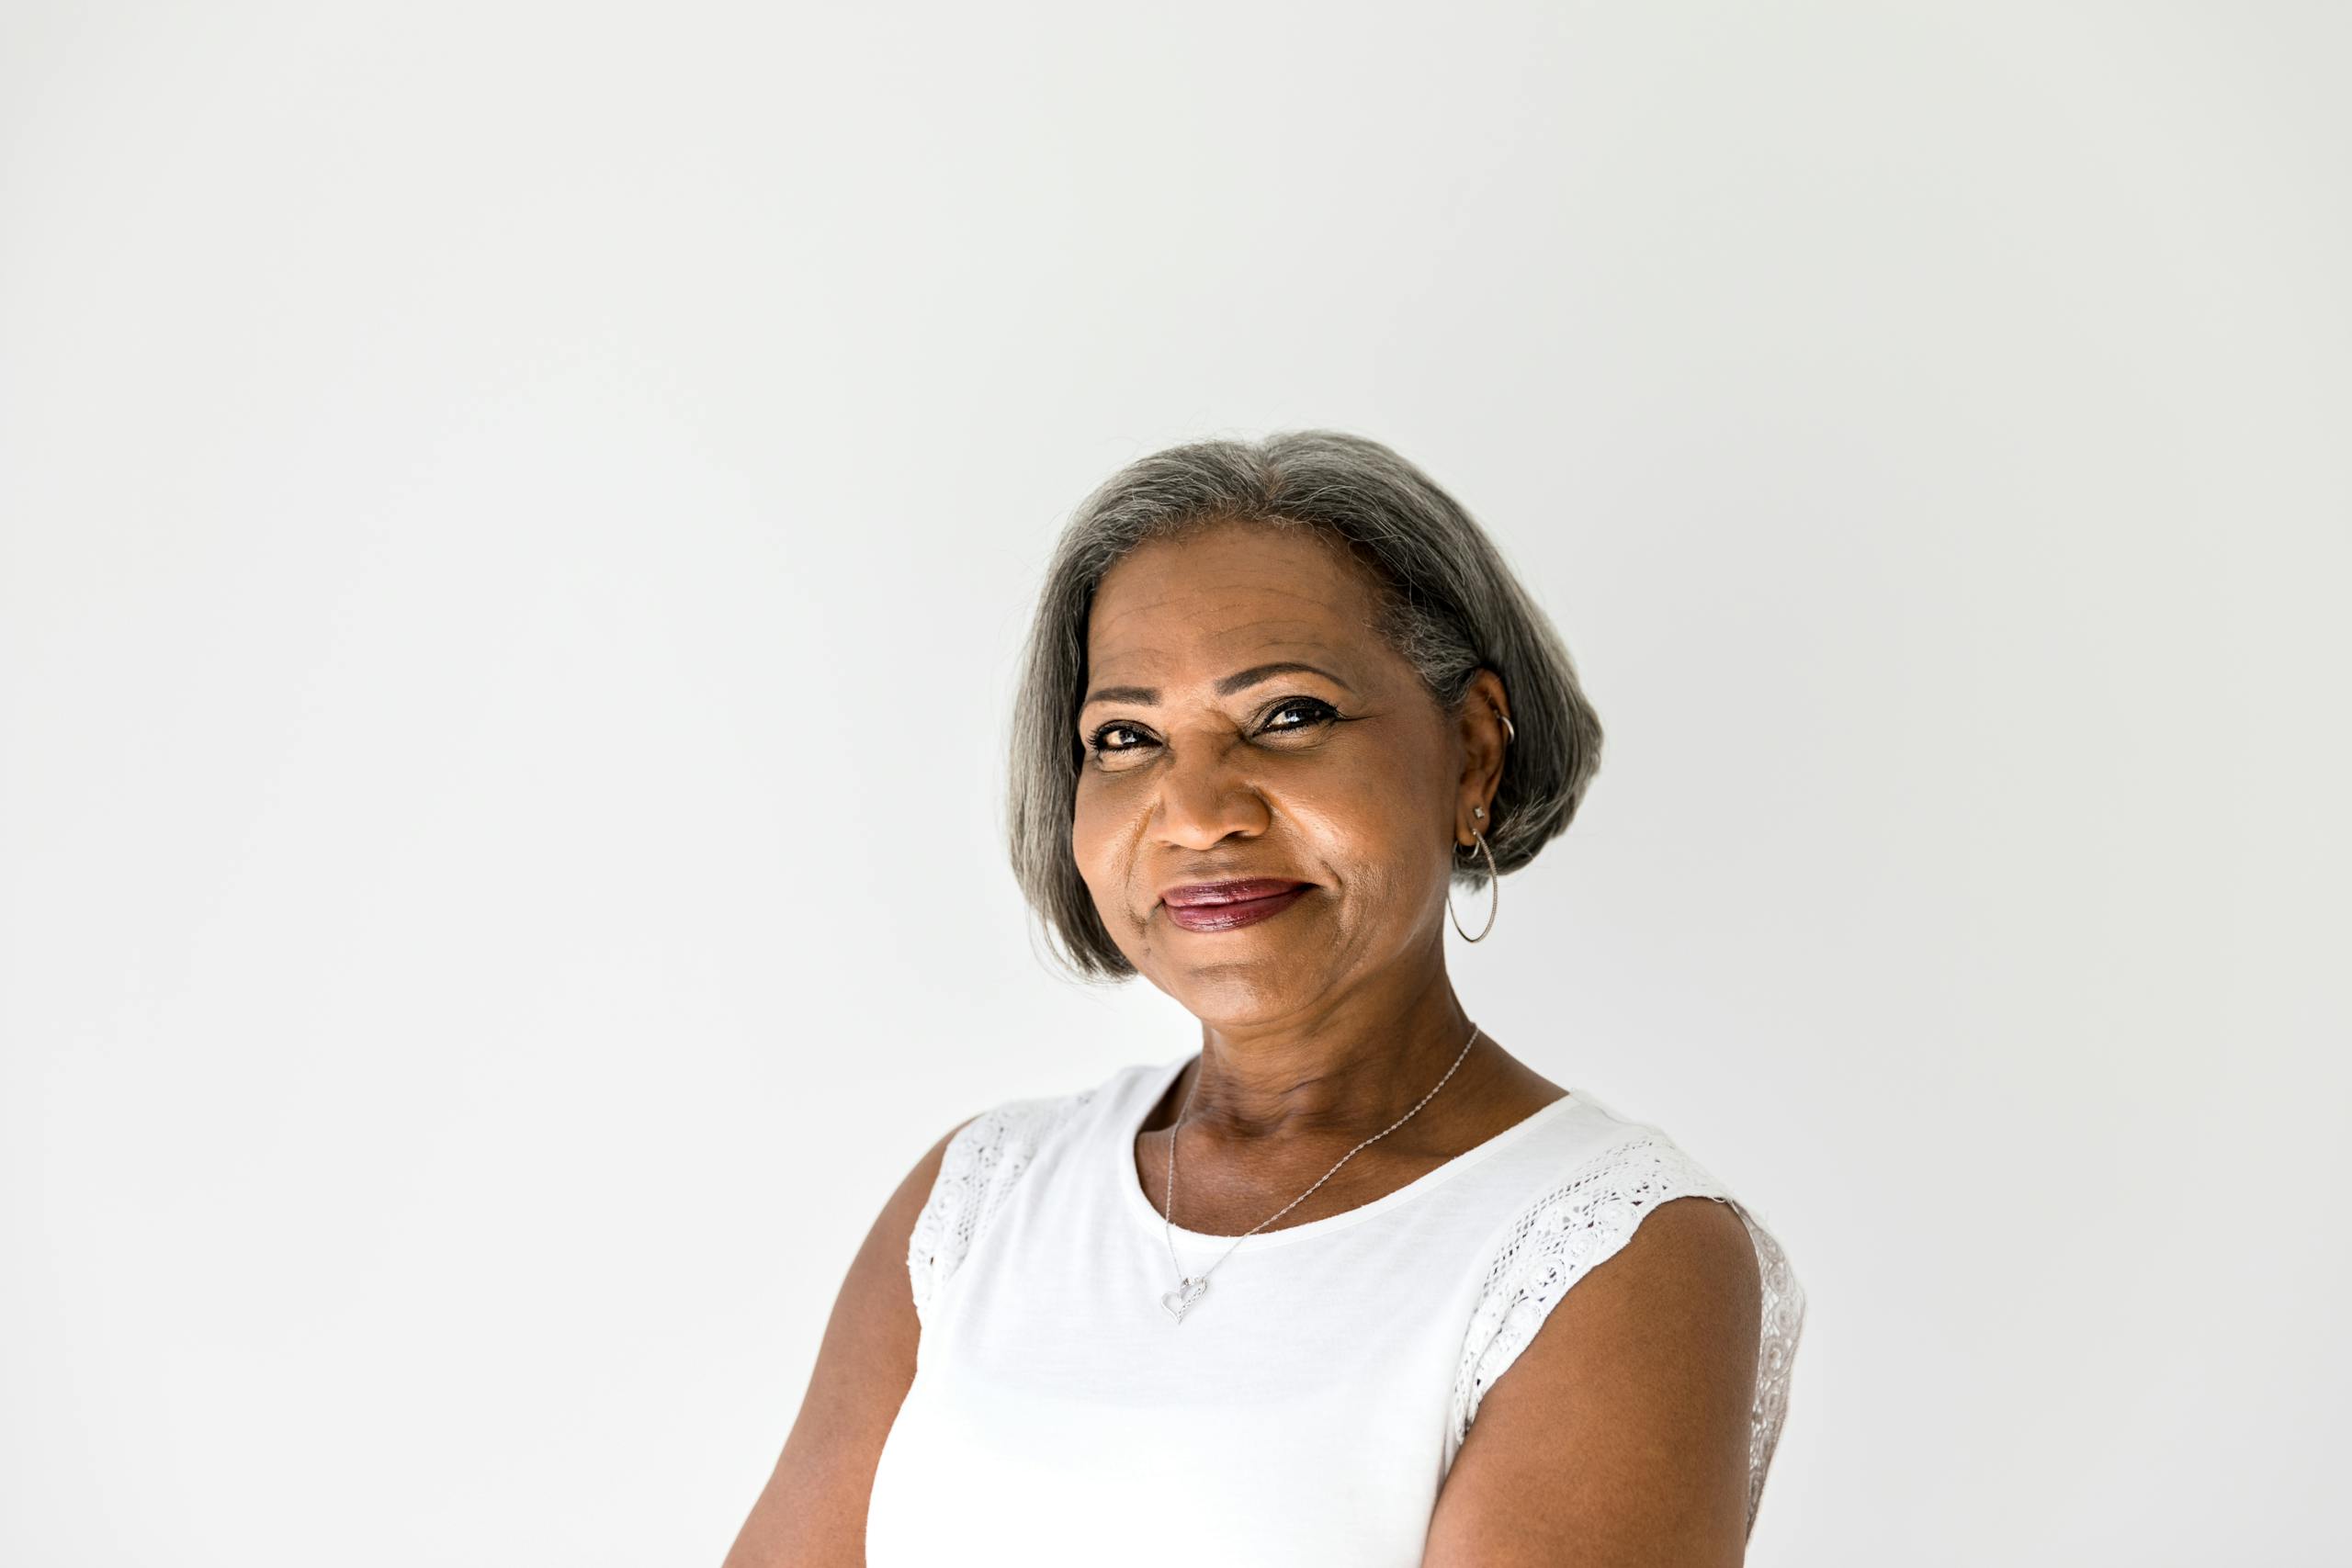 Portrait of an attractive senior woman with a confident smile on her face.